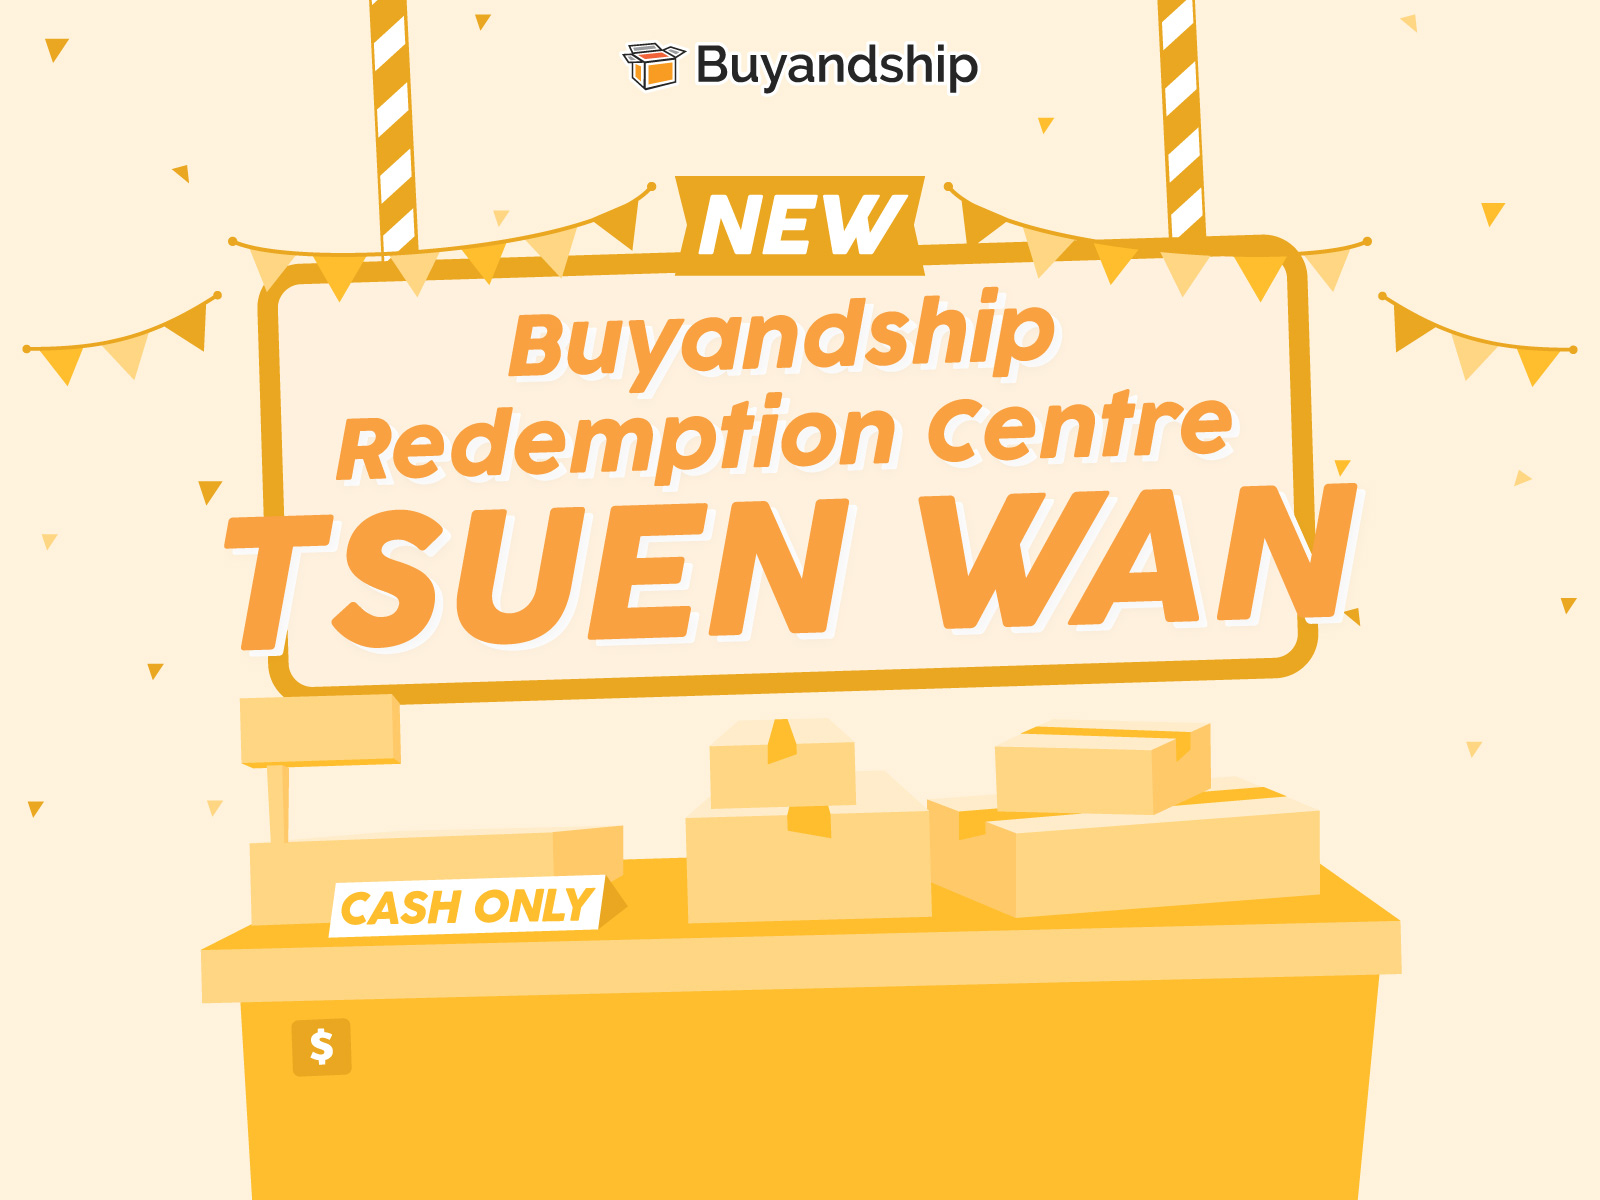 A New Buyandship Redemption Centre Opens in Tsuen Wan